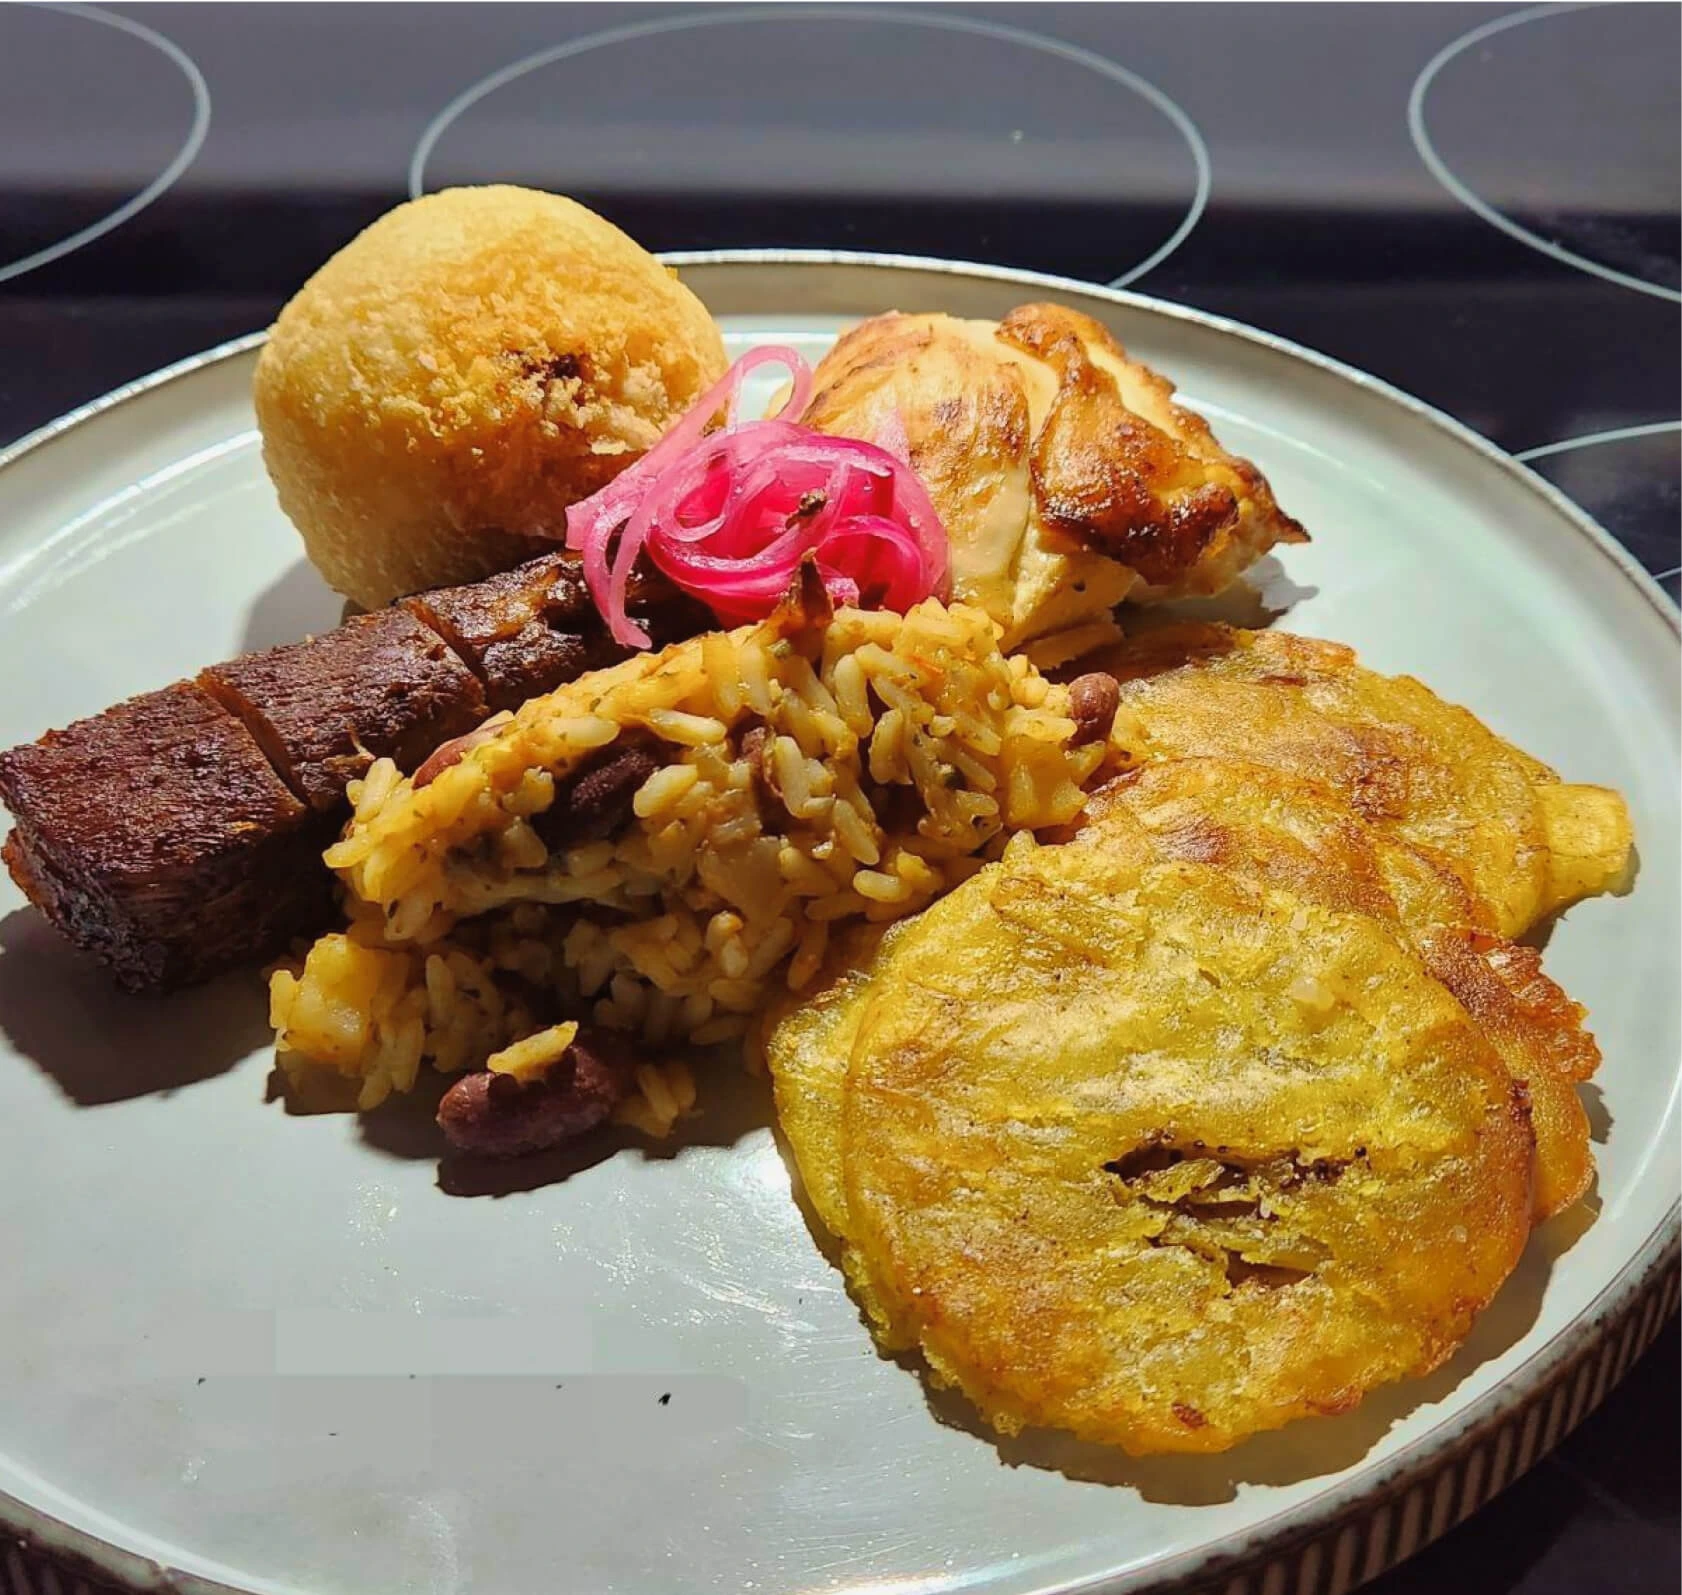 A plate showcasing a delectable combination of rice, beans, and meat, forming a tantalizing meal